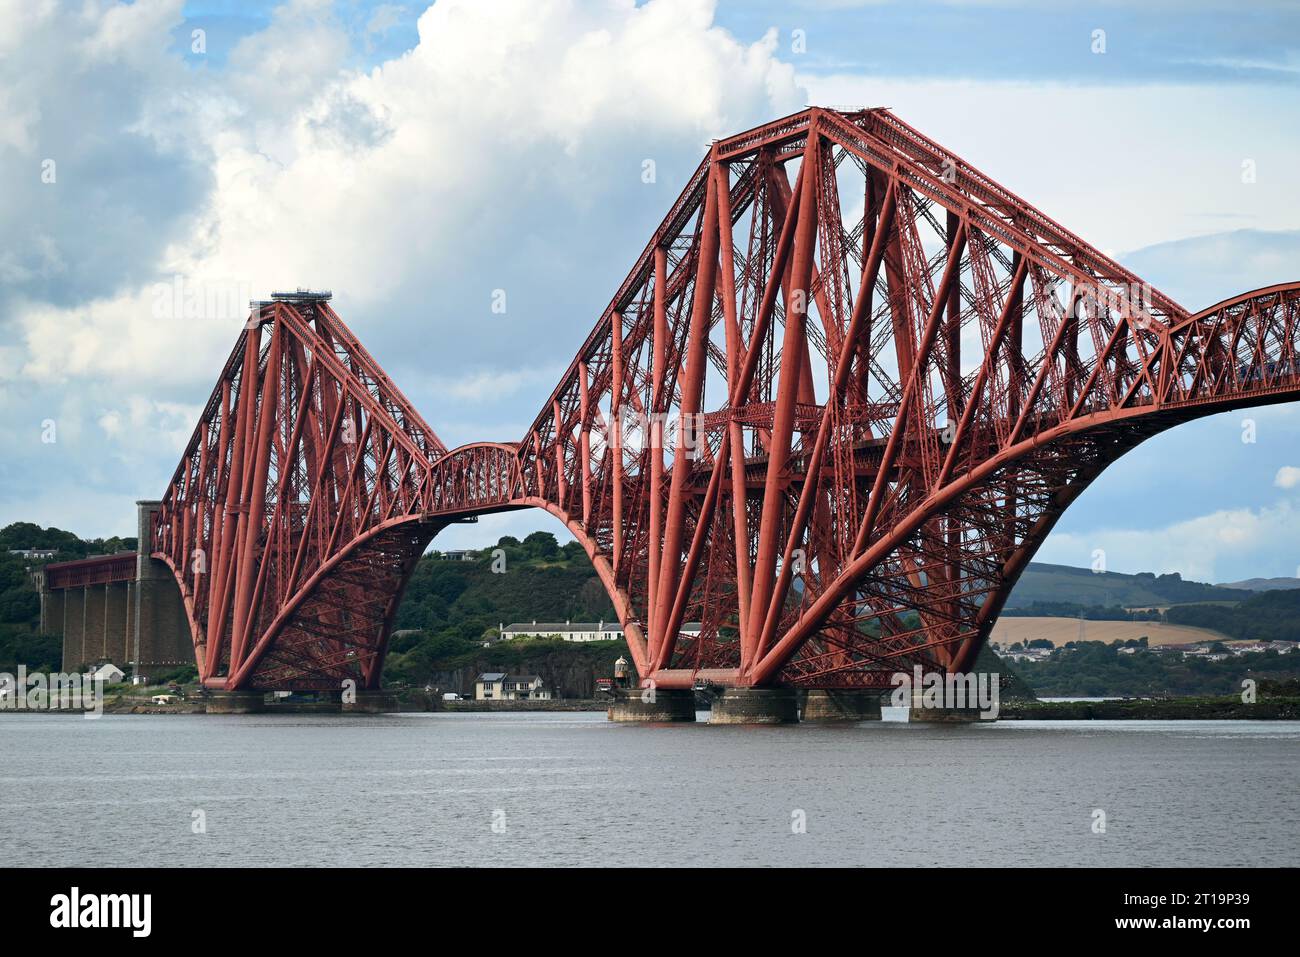 The Forth railway bridge in Queensferry allows the railway to cross the Firth of Forth near Edinburgh, Scotland. Stock Photo